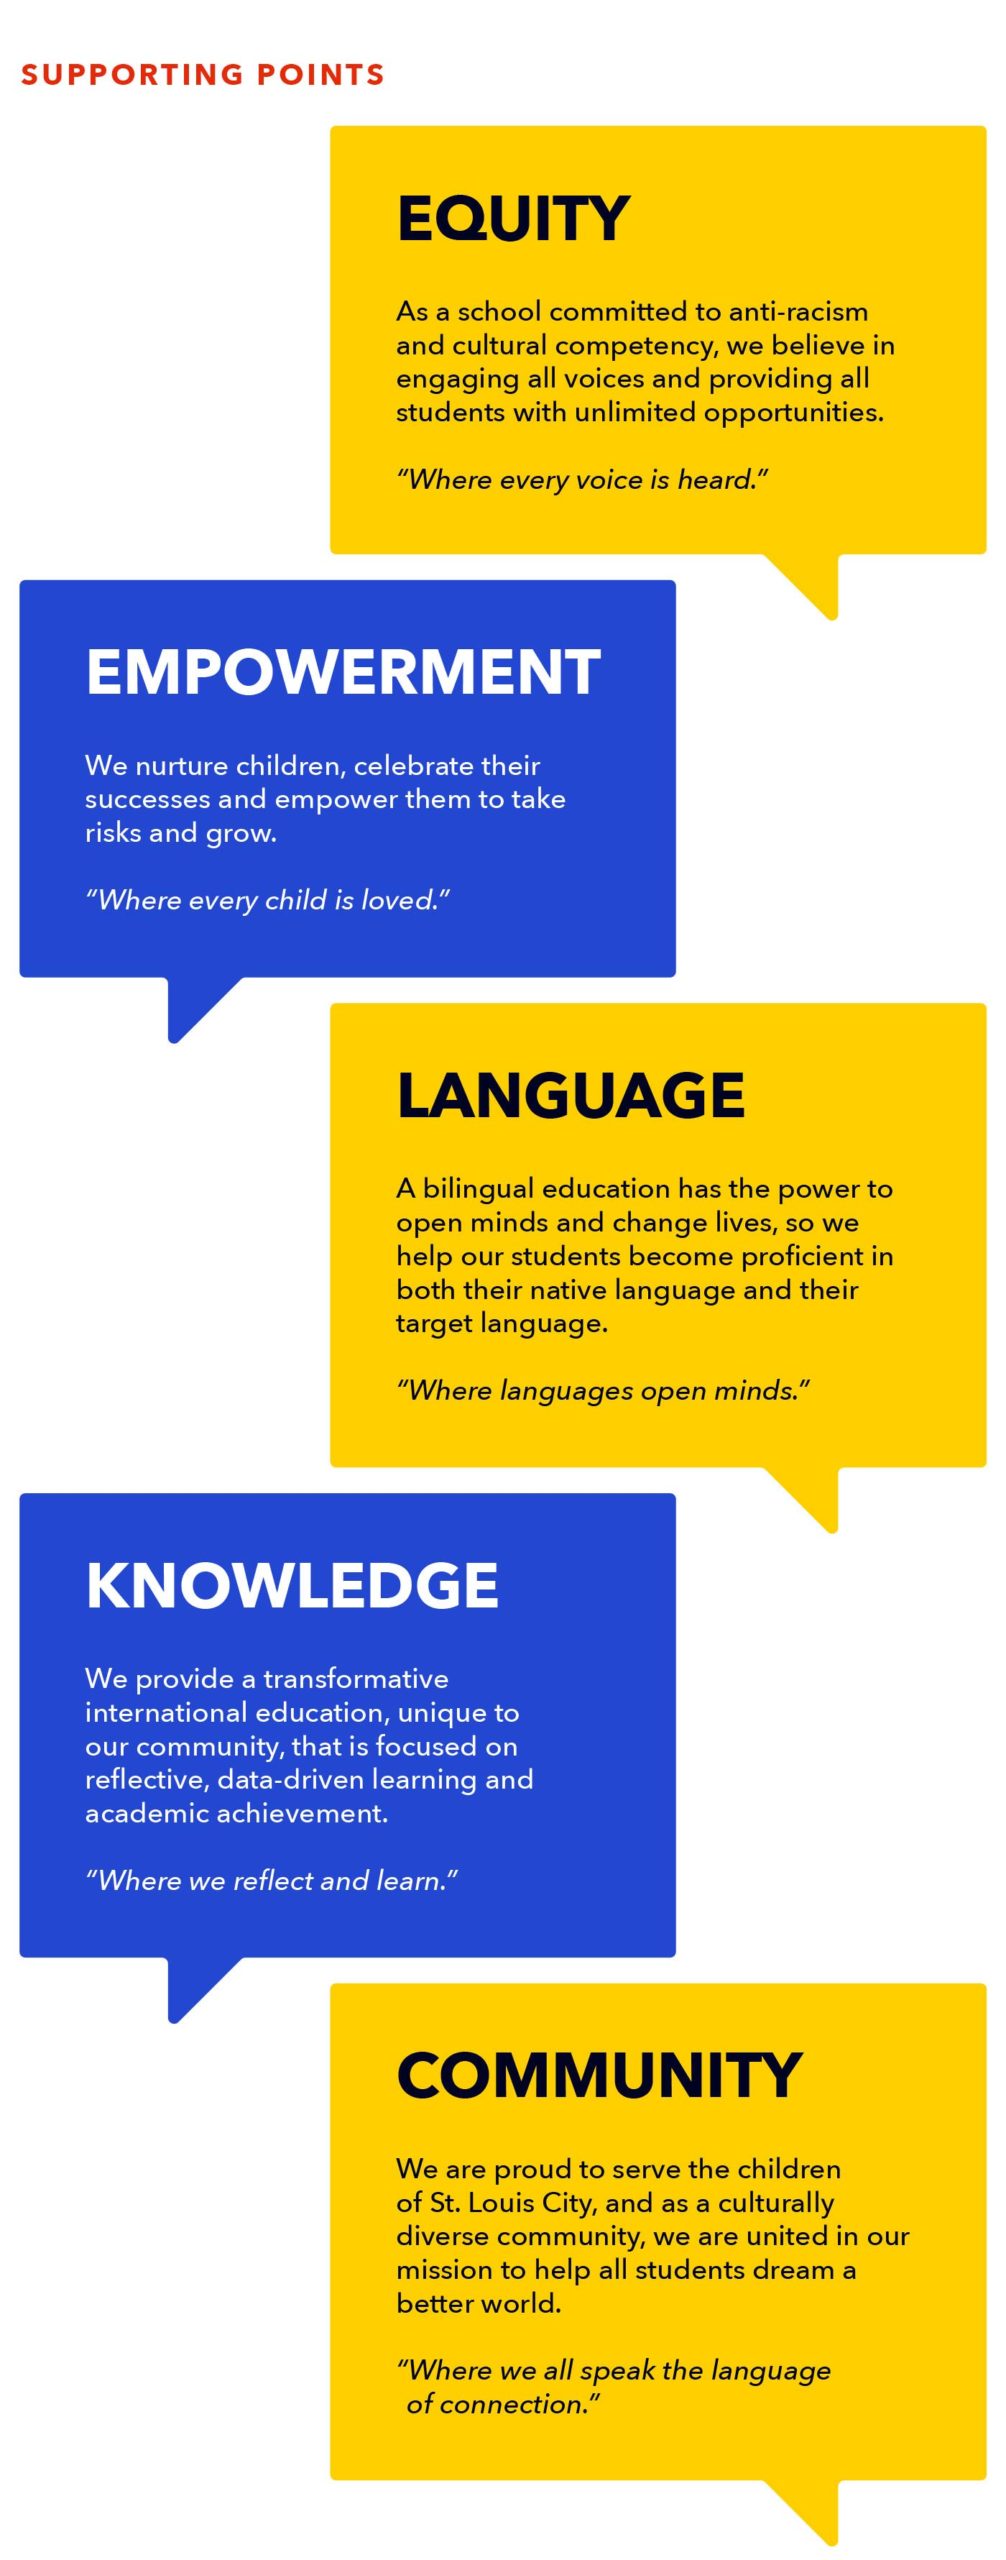 St. Louis Language Immersion School's brand language supporting points, including equity, empowerment, language, knowledge and community